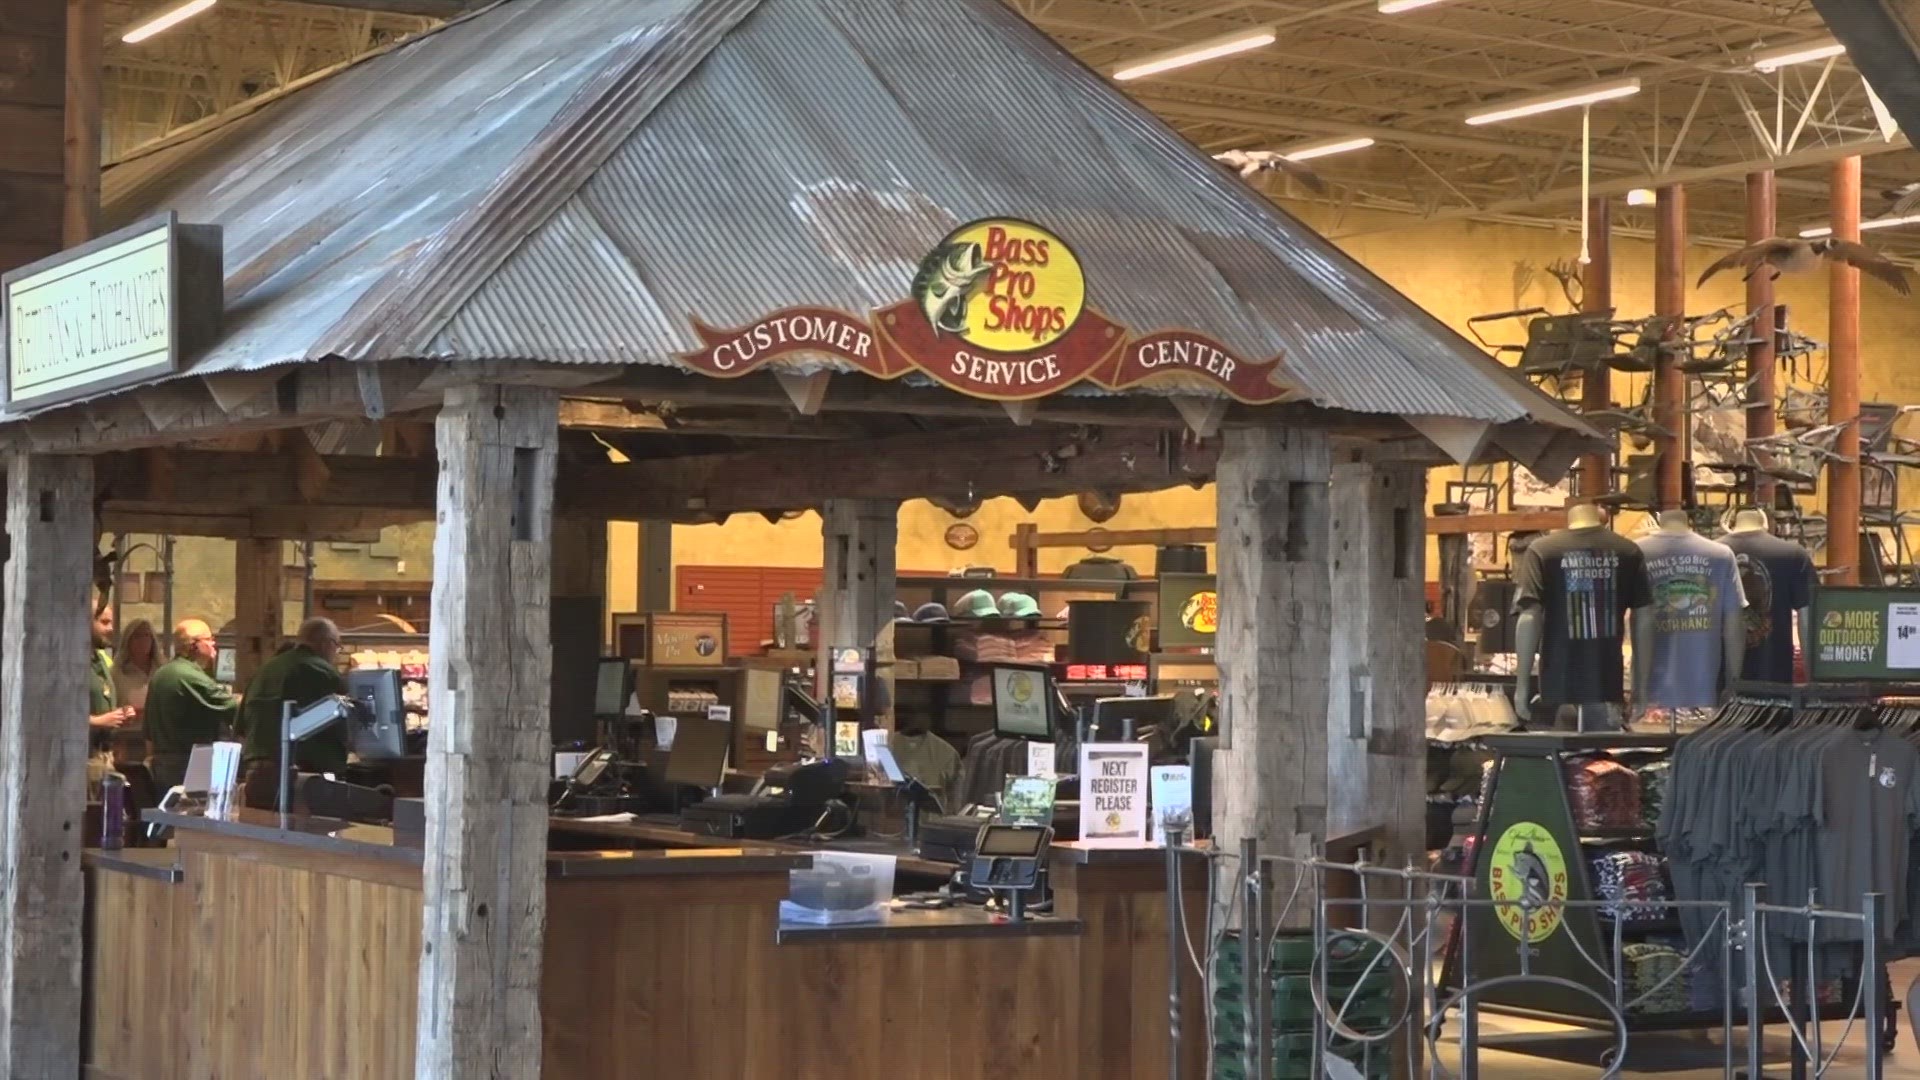 South St. Louis County is getting a destination retailer Wednesday night when Bass Pro Shops opens its third St. Louis-area location in Sunset Hills.